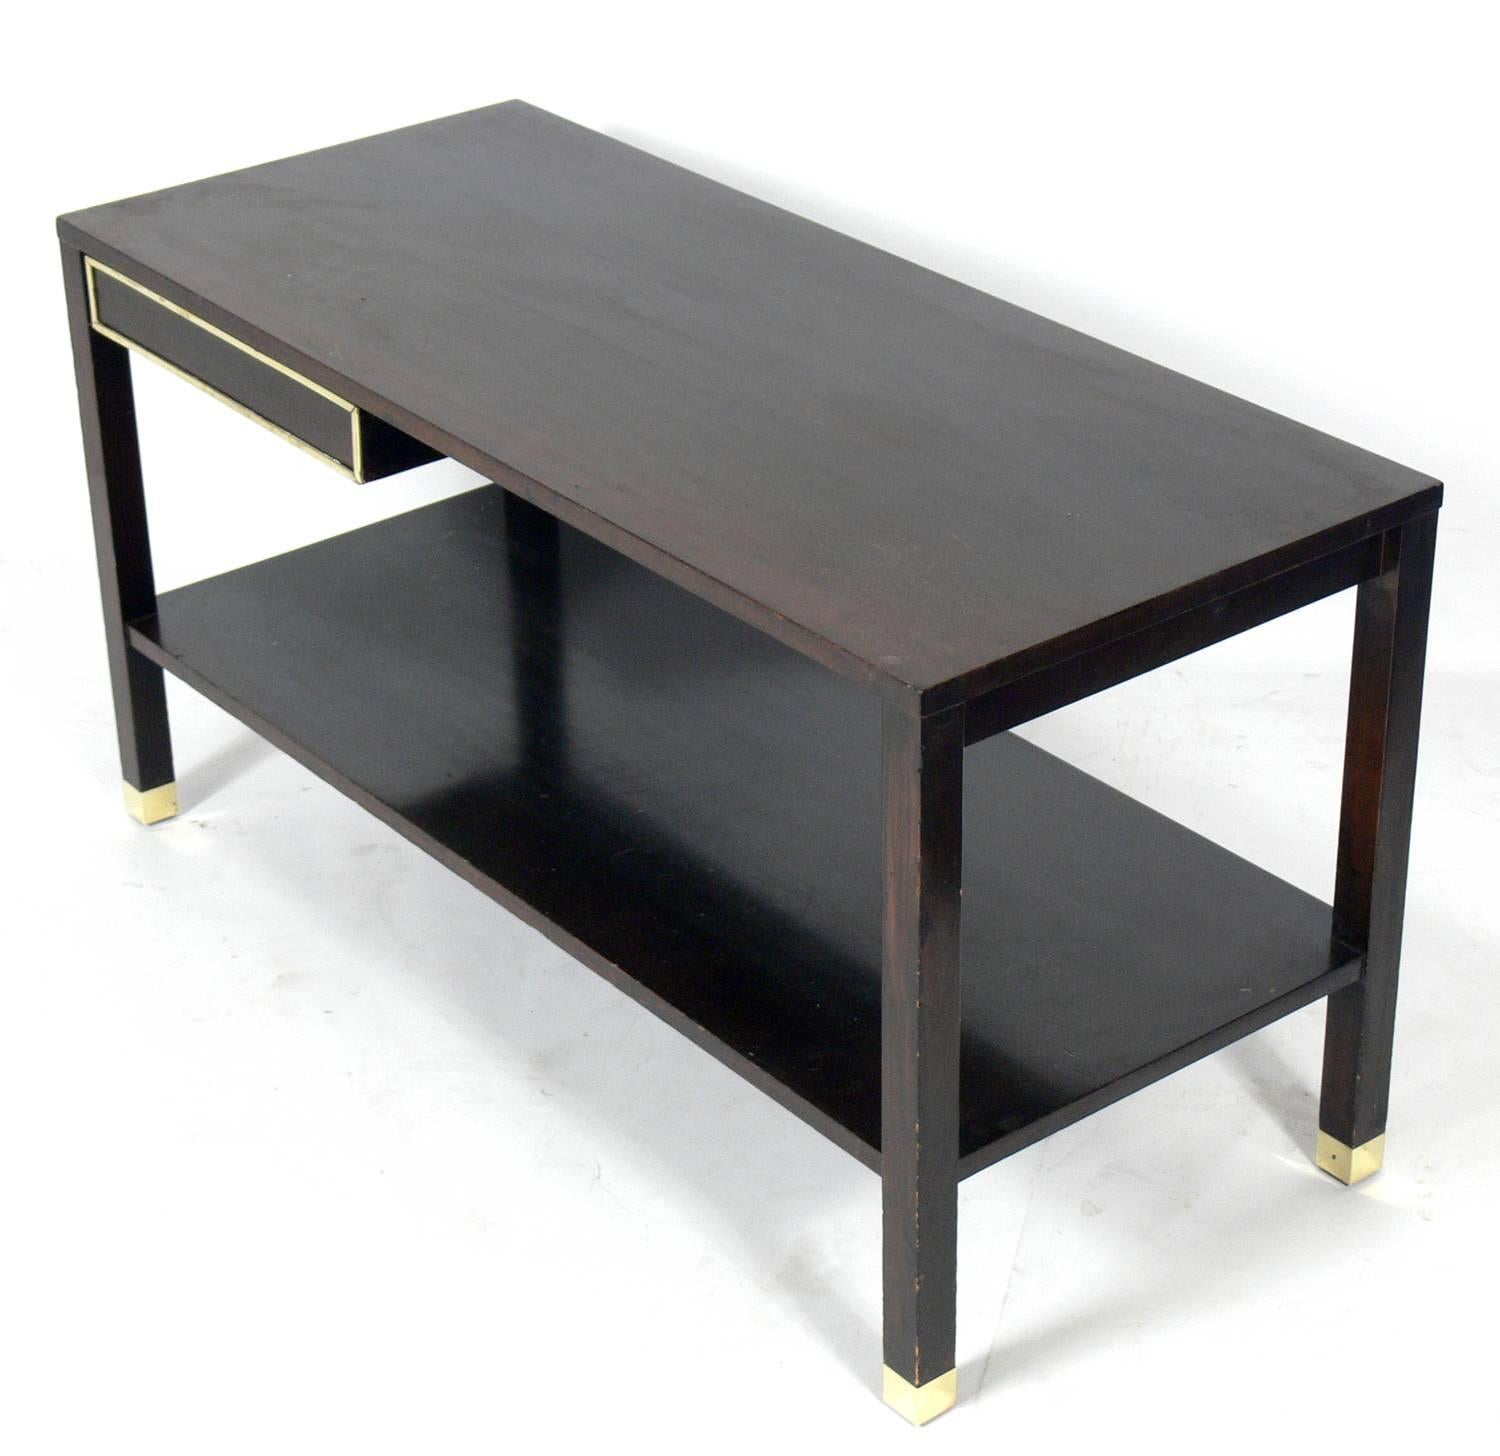 Low slung console table or bar by Harvey Probber, American, circa 1960s. This piece is currently being refinished. The price noted below includes refinishing. This piece is a versatile size and can be used as a console table, media table, or bar.